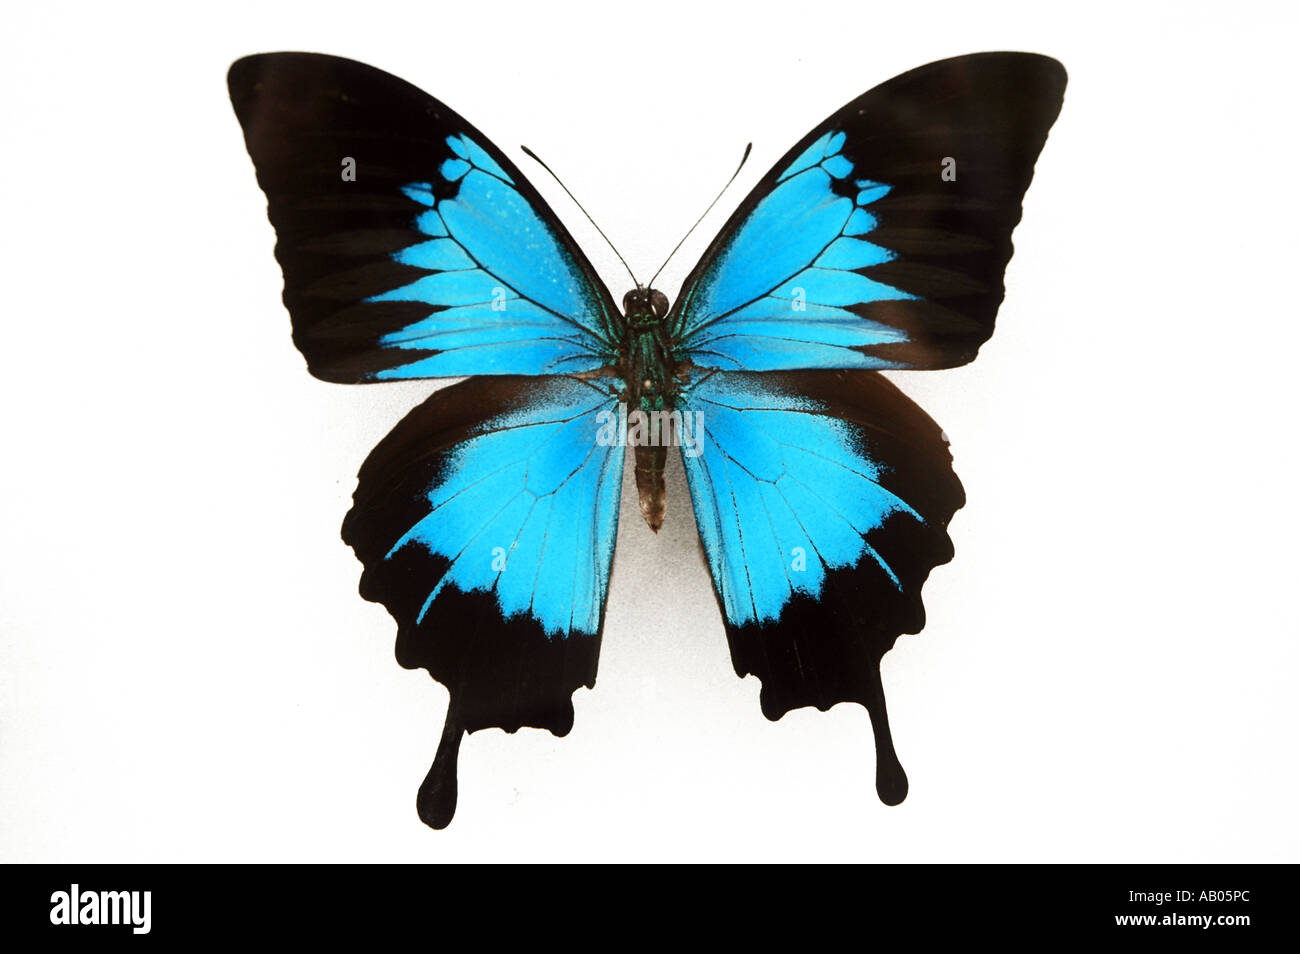 Blue Swallowtail butterfly Papilio Ulysses from Indonesia Stock ...